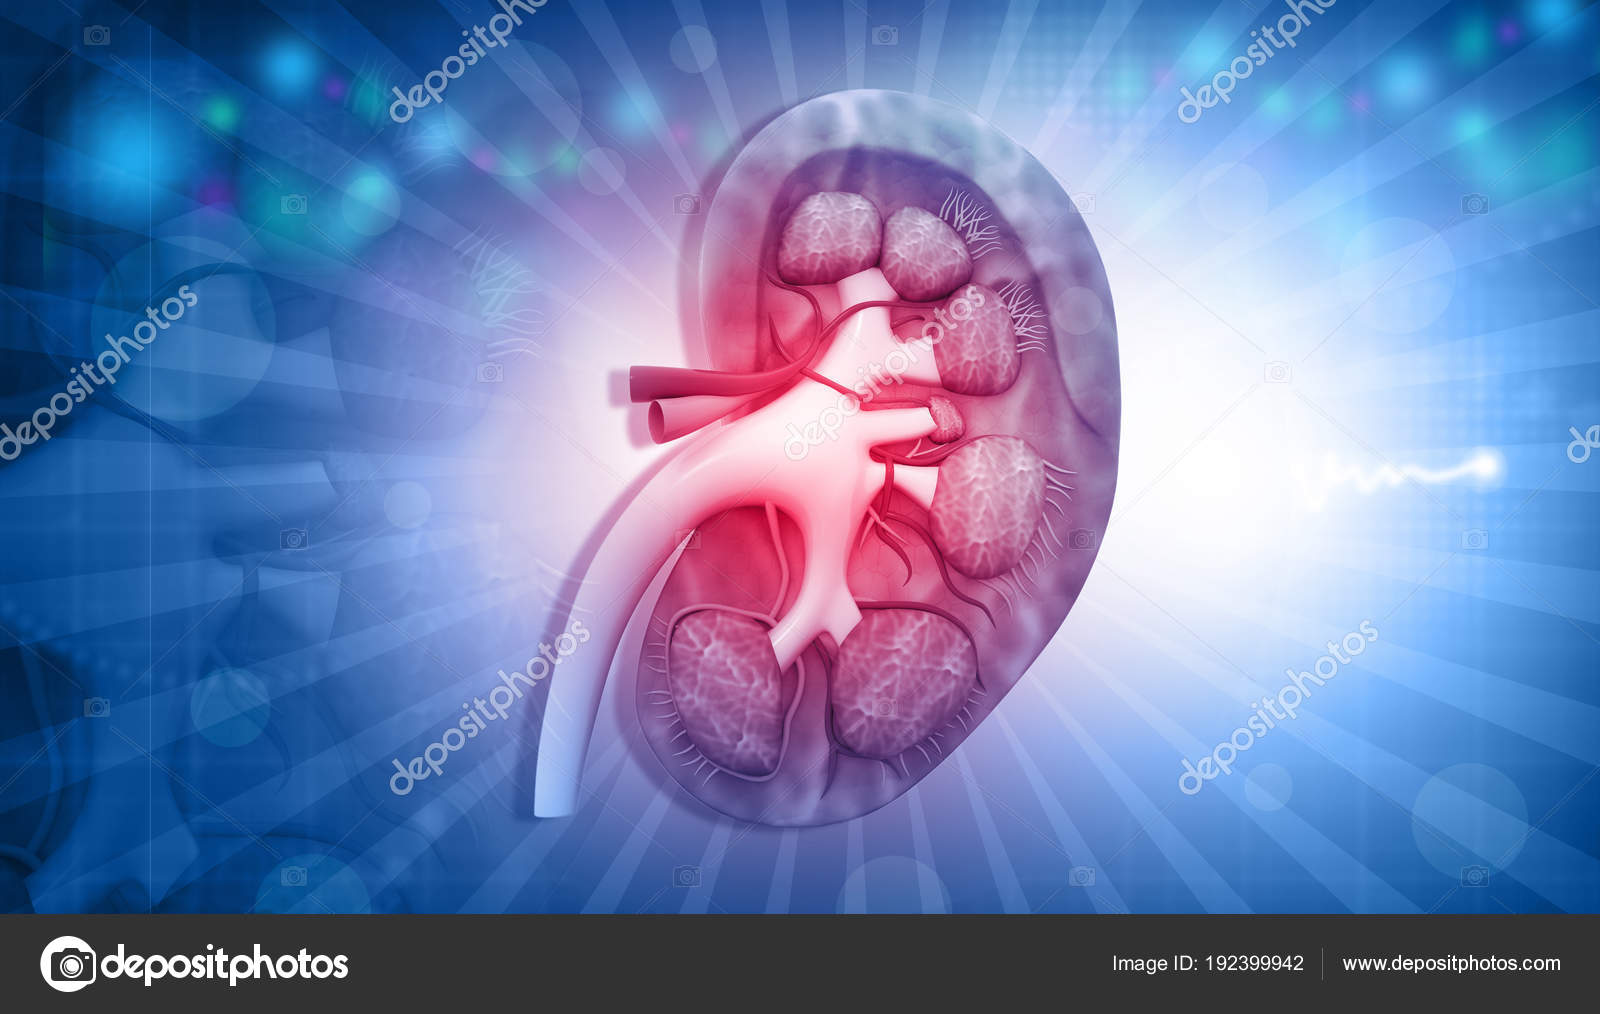 Human Kidney Anatomy Abstract Background Illustration - Nephrology Background , HD Wallpaper & Backgrounds